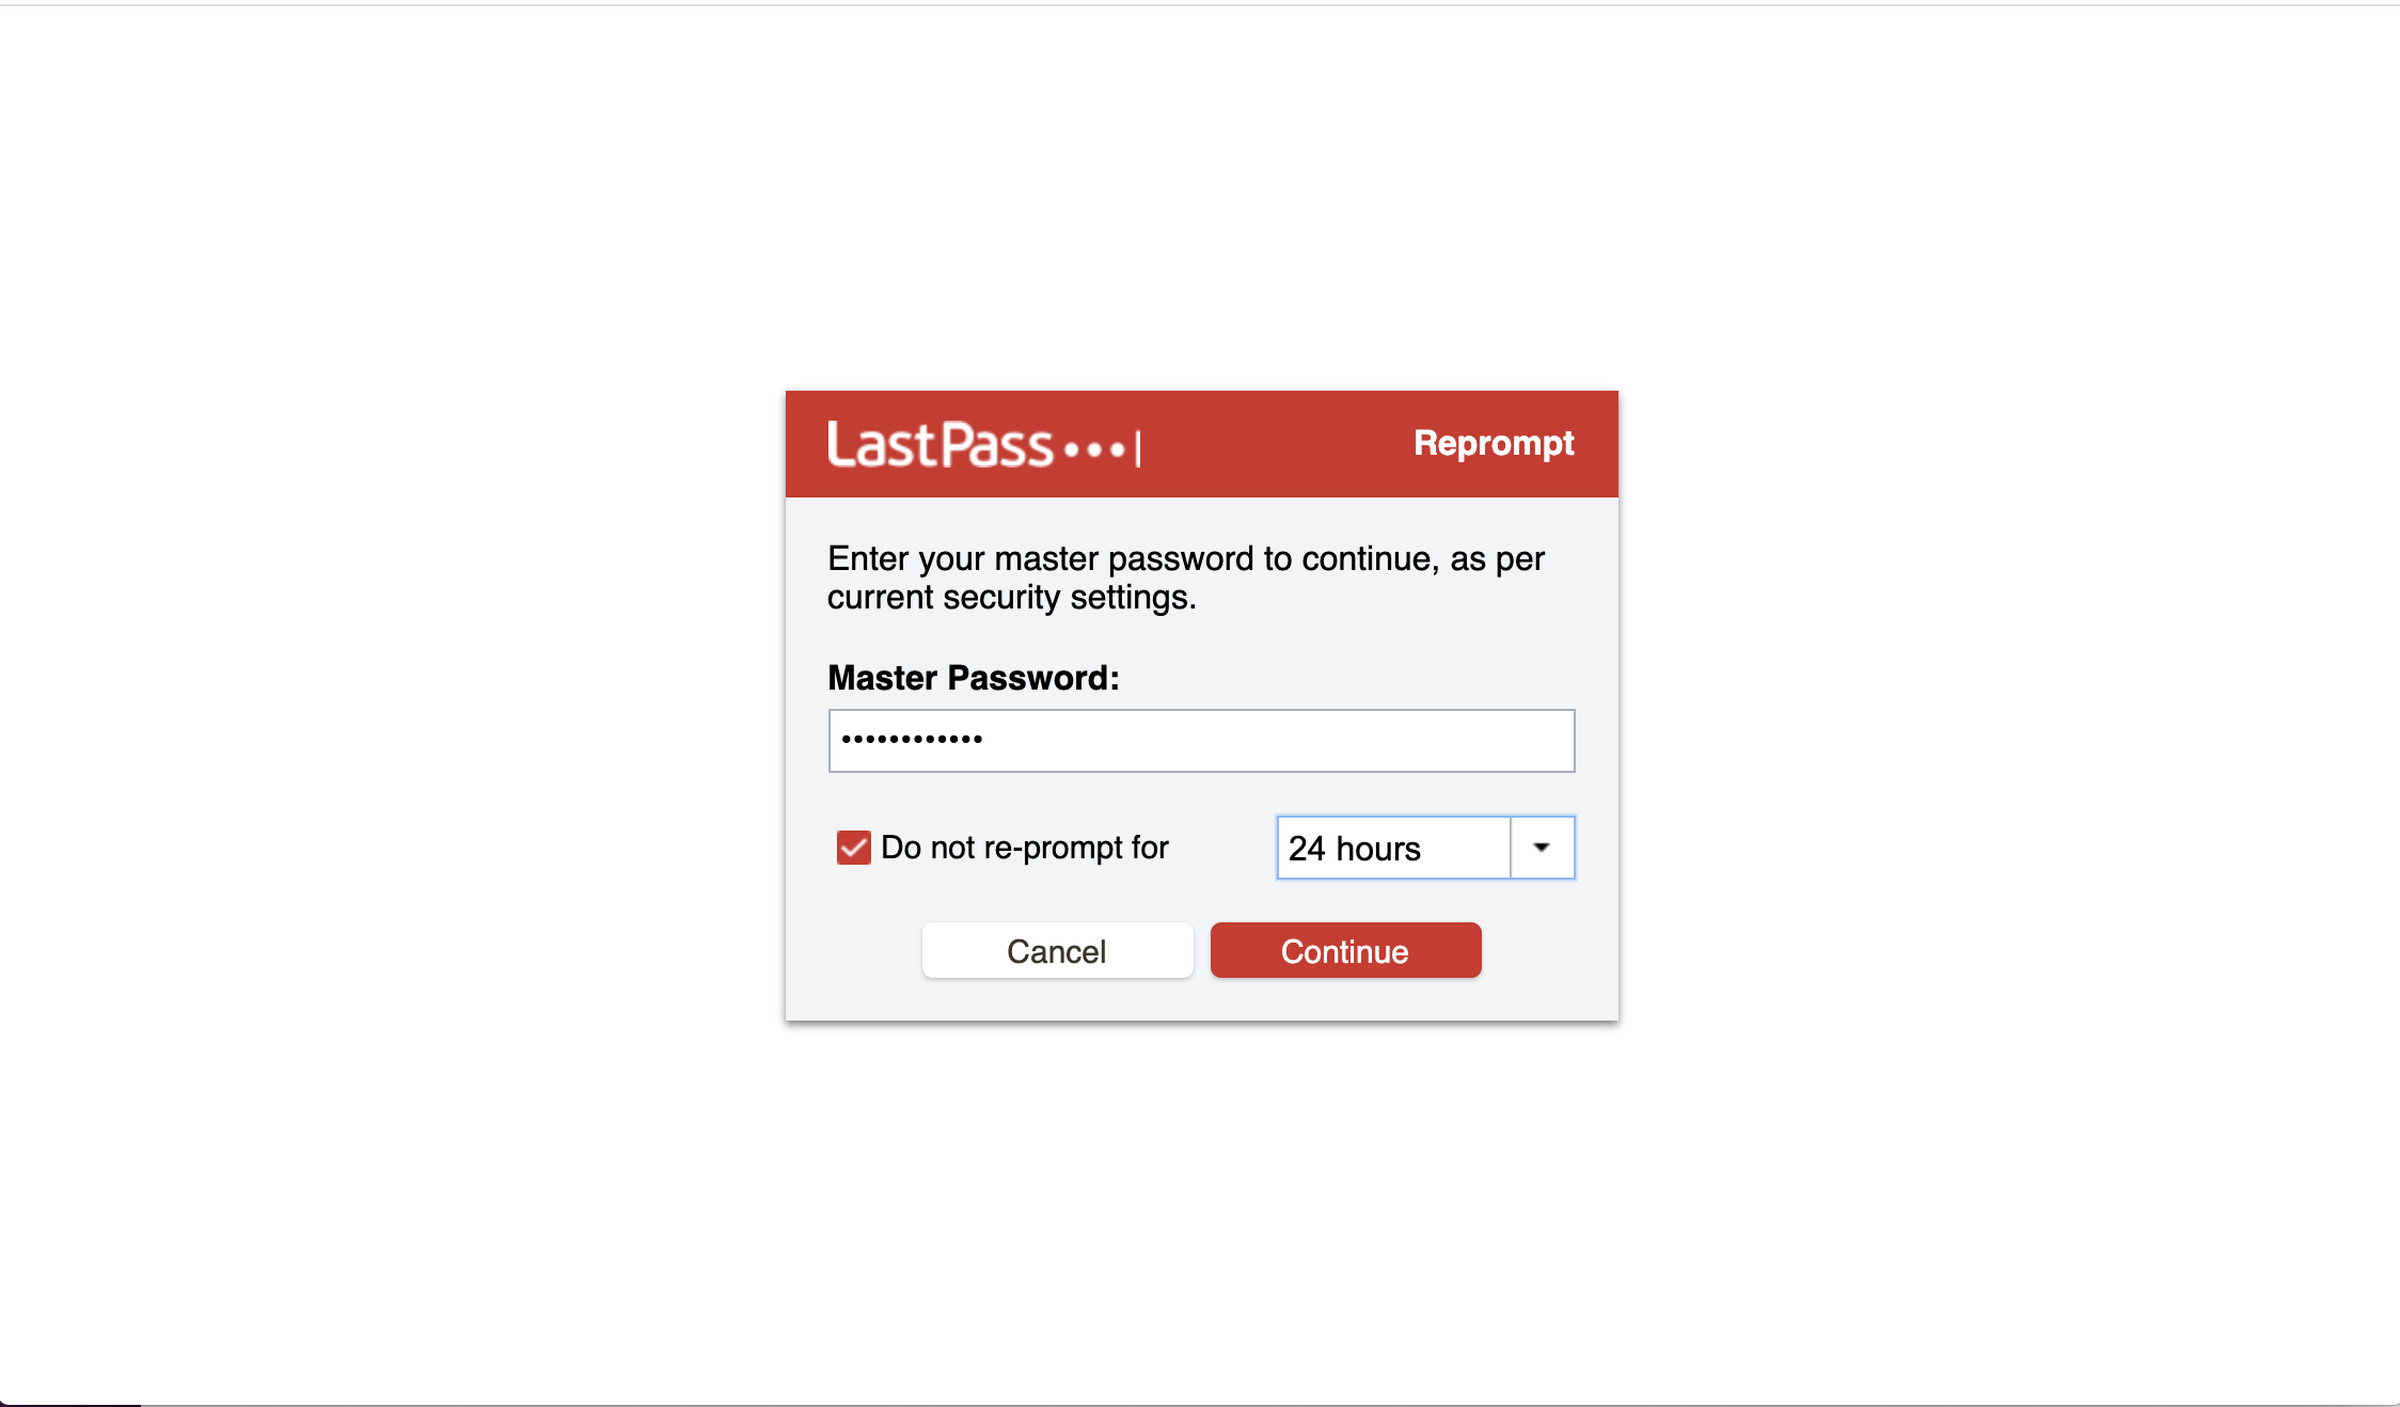 Fill in your master password to download your data.